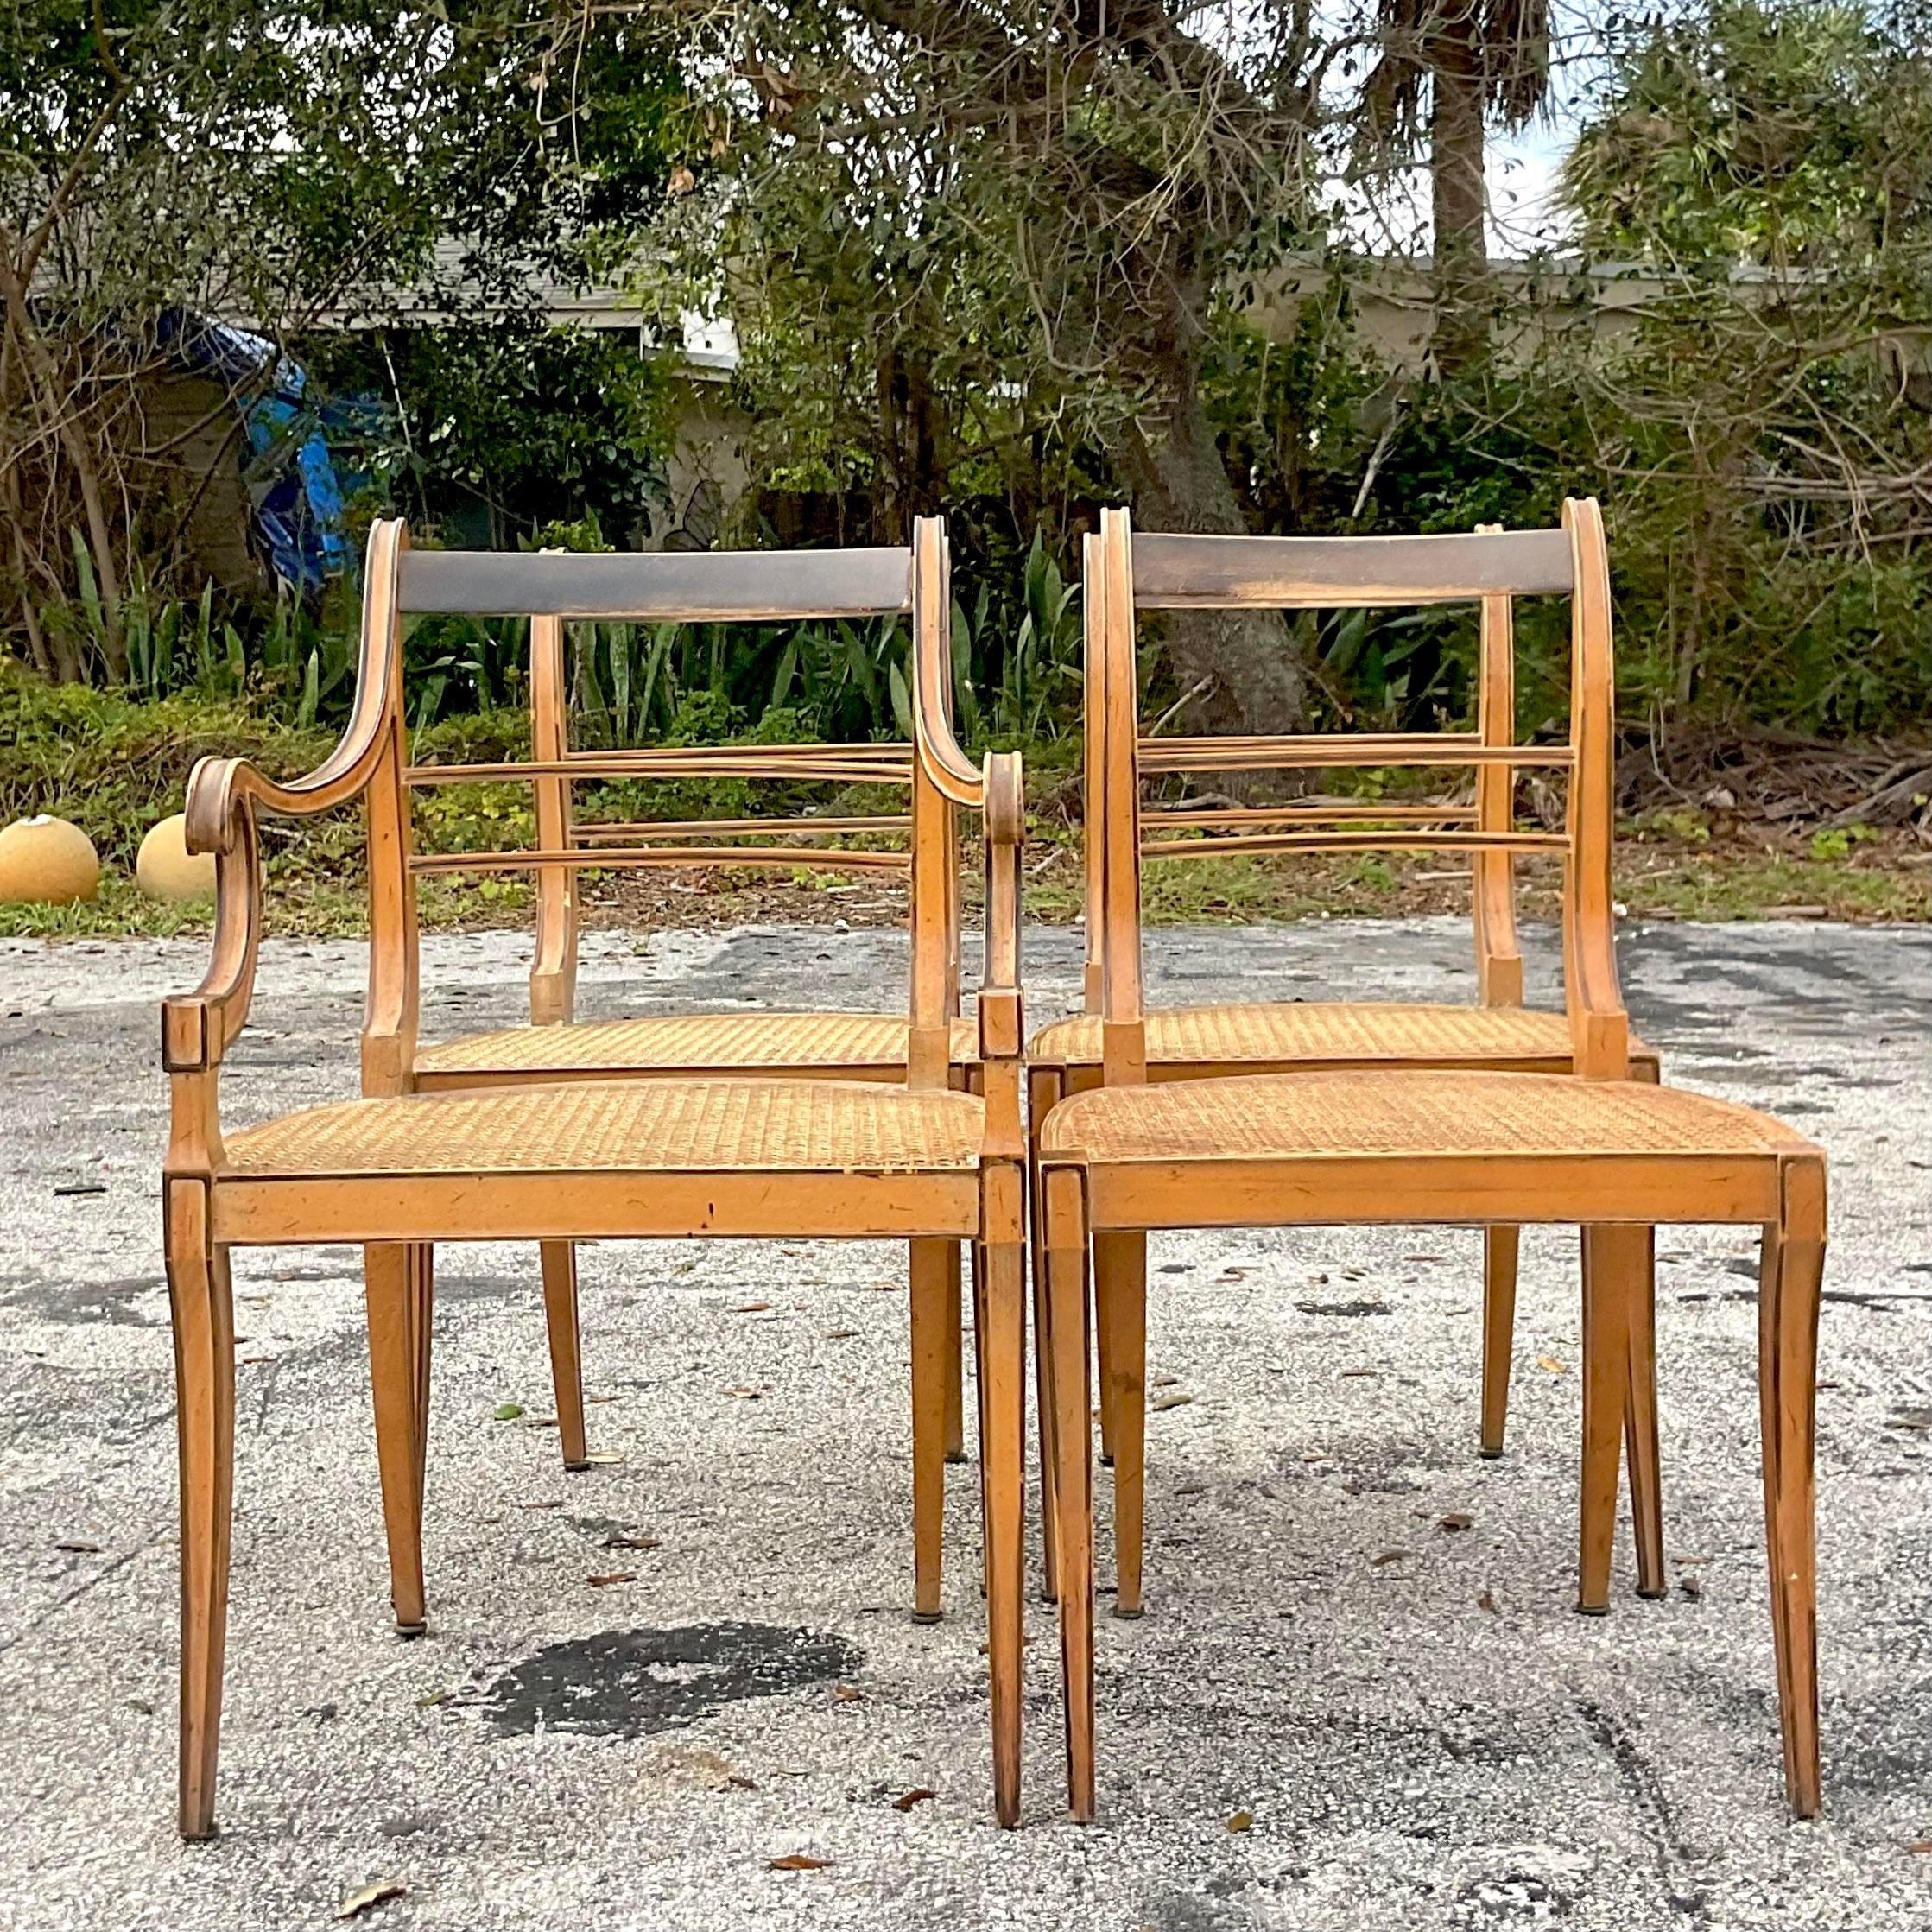 A stunning set of vintage Boho dining chairs. A chic scroll back design with handsome Saber legs. Inset cane seat panels. The perfect amount of patina from time. Acquired from a Palm Beach estate.

Arm chair 21.75x18x34.25